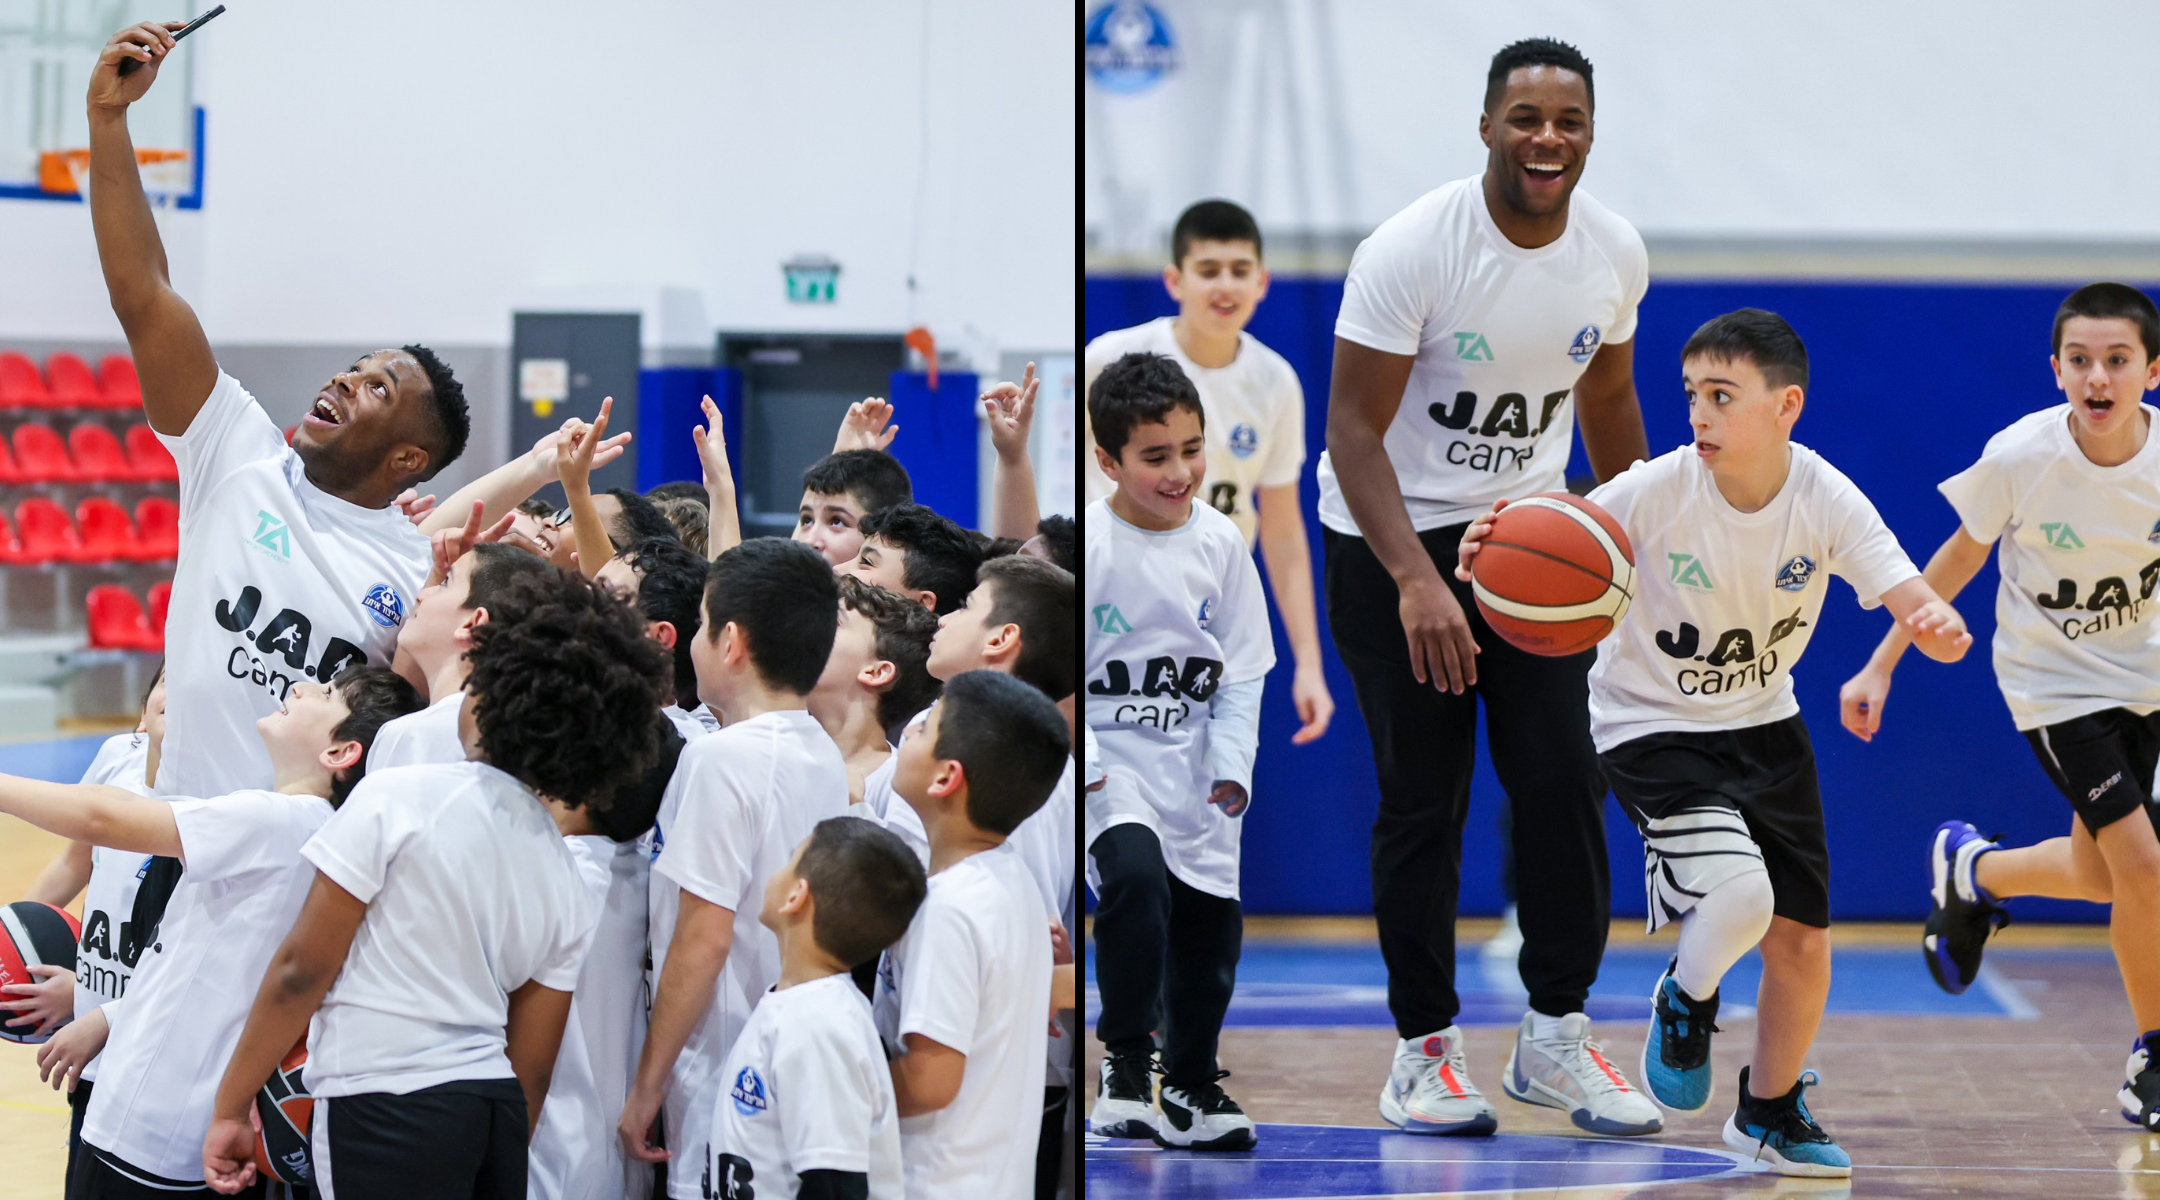 The Jewish Sport Report: How this pro basketball player is using sports to inspire Israeli kids